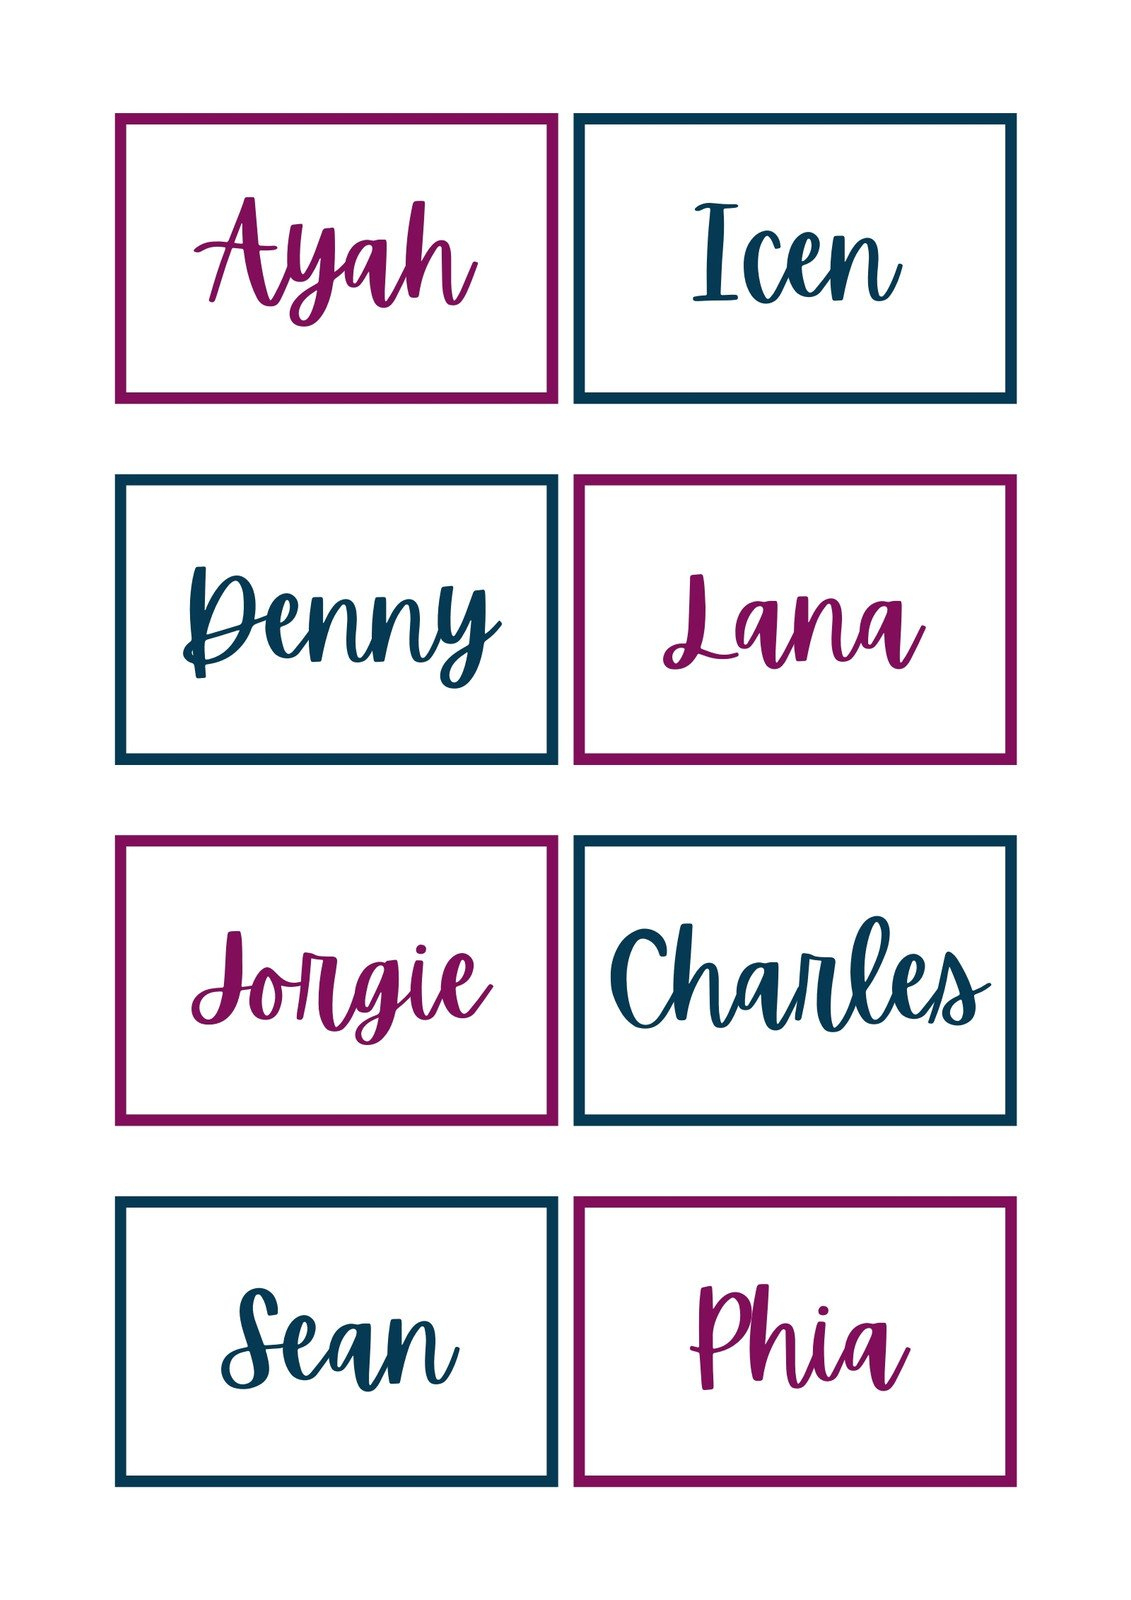 Free, Printable, Customizable Name Tag Templates | Canva intended for Free Customized Name Tags Printable